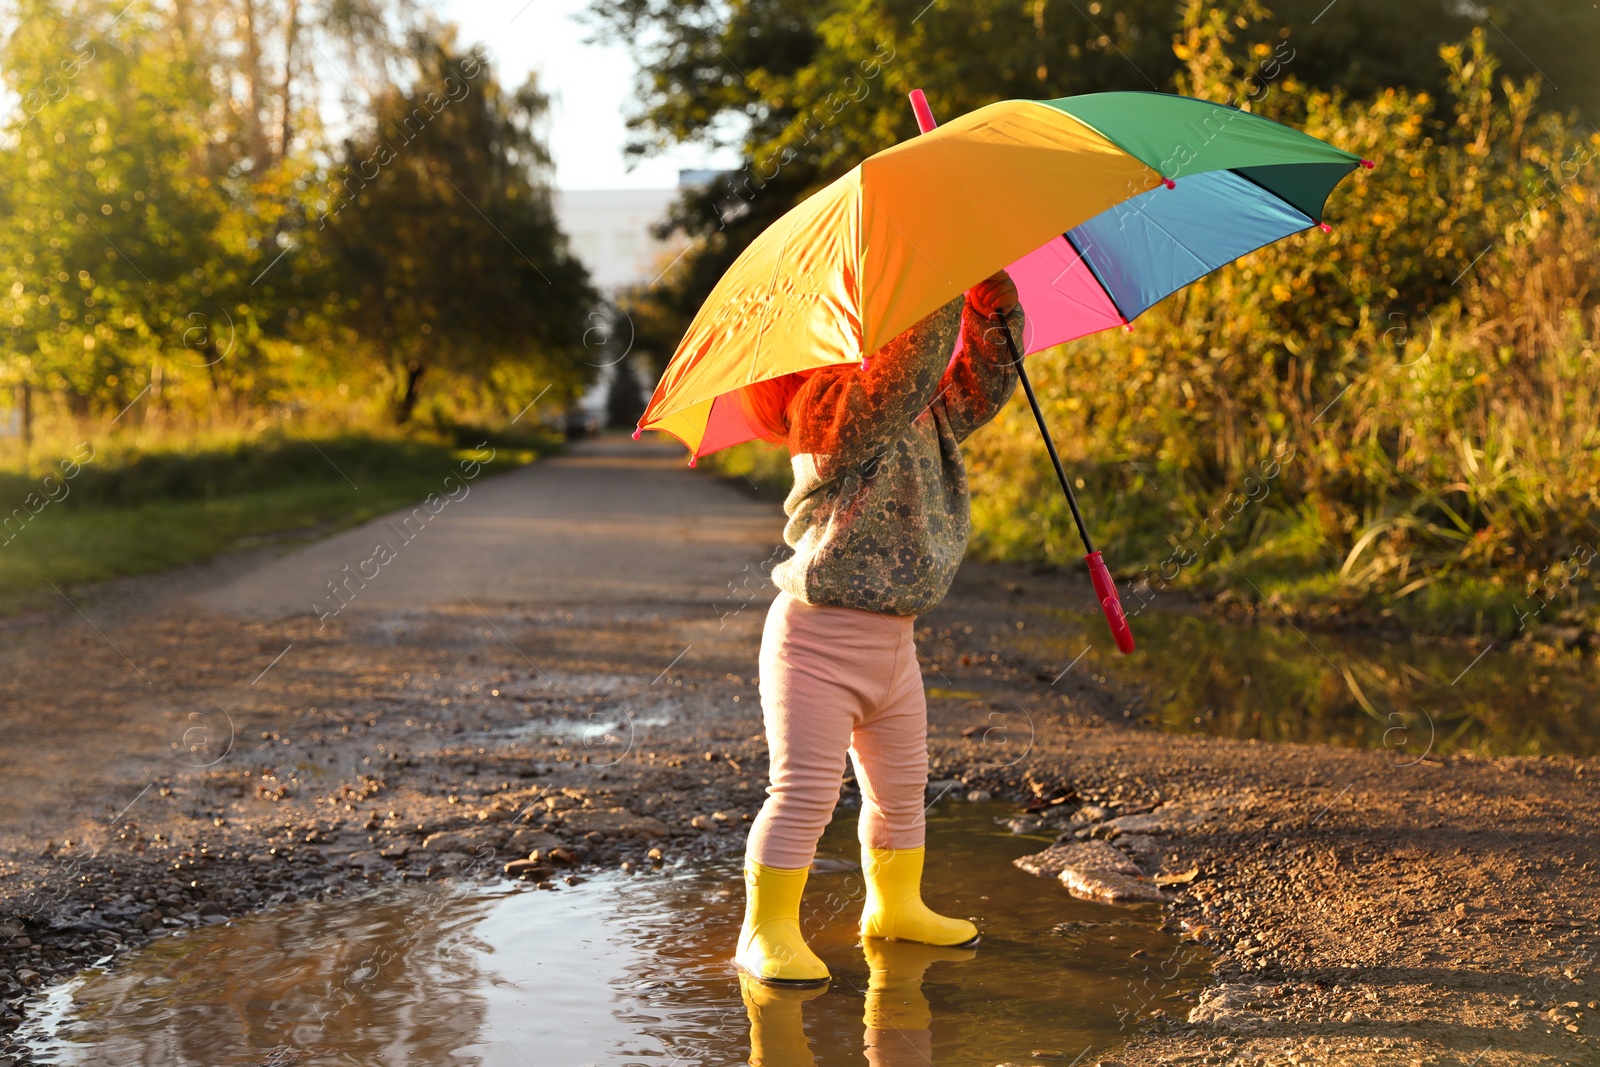 Photo of Little girl wearing rubber boots with colorful umbrella in puddle outdoors, space for text. Autumn walk